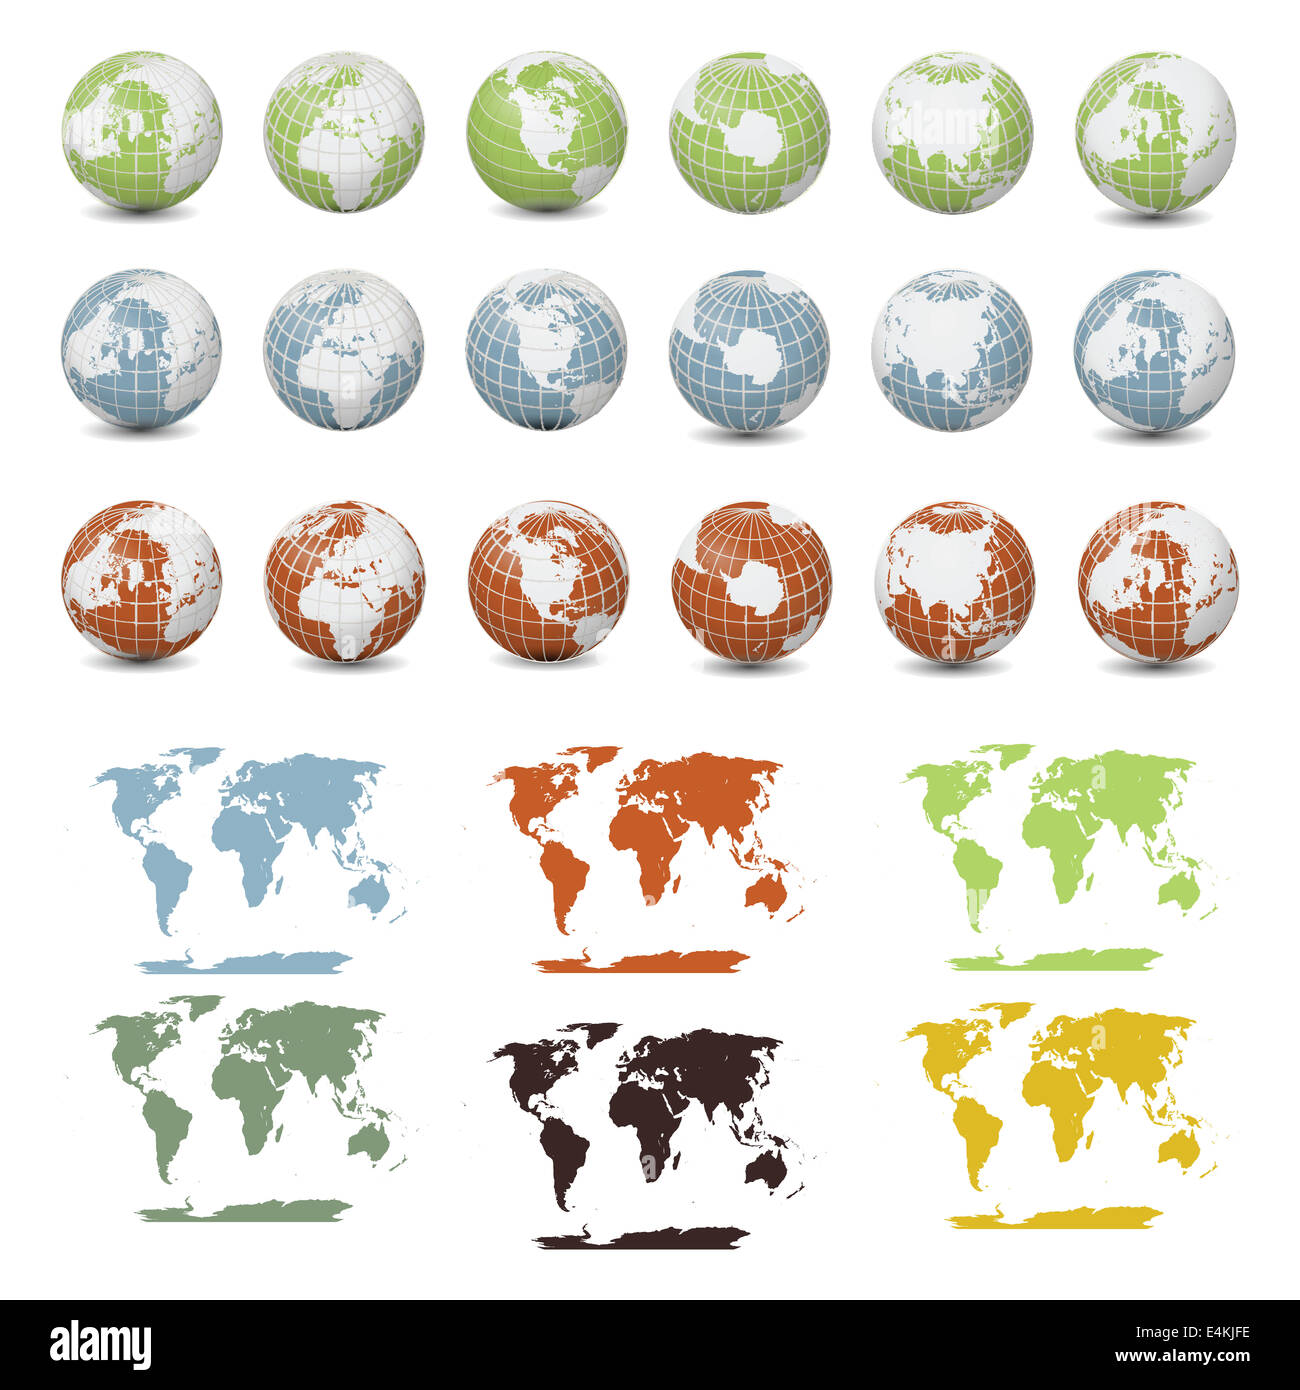 Collection of Earth Maps and Globes Stock Photo